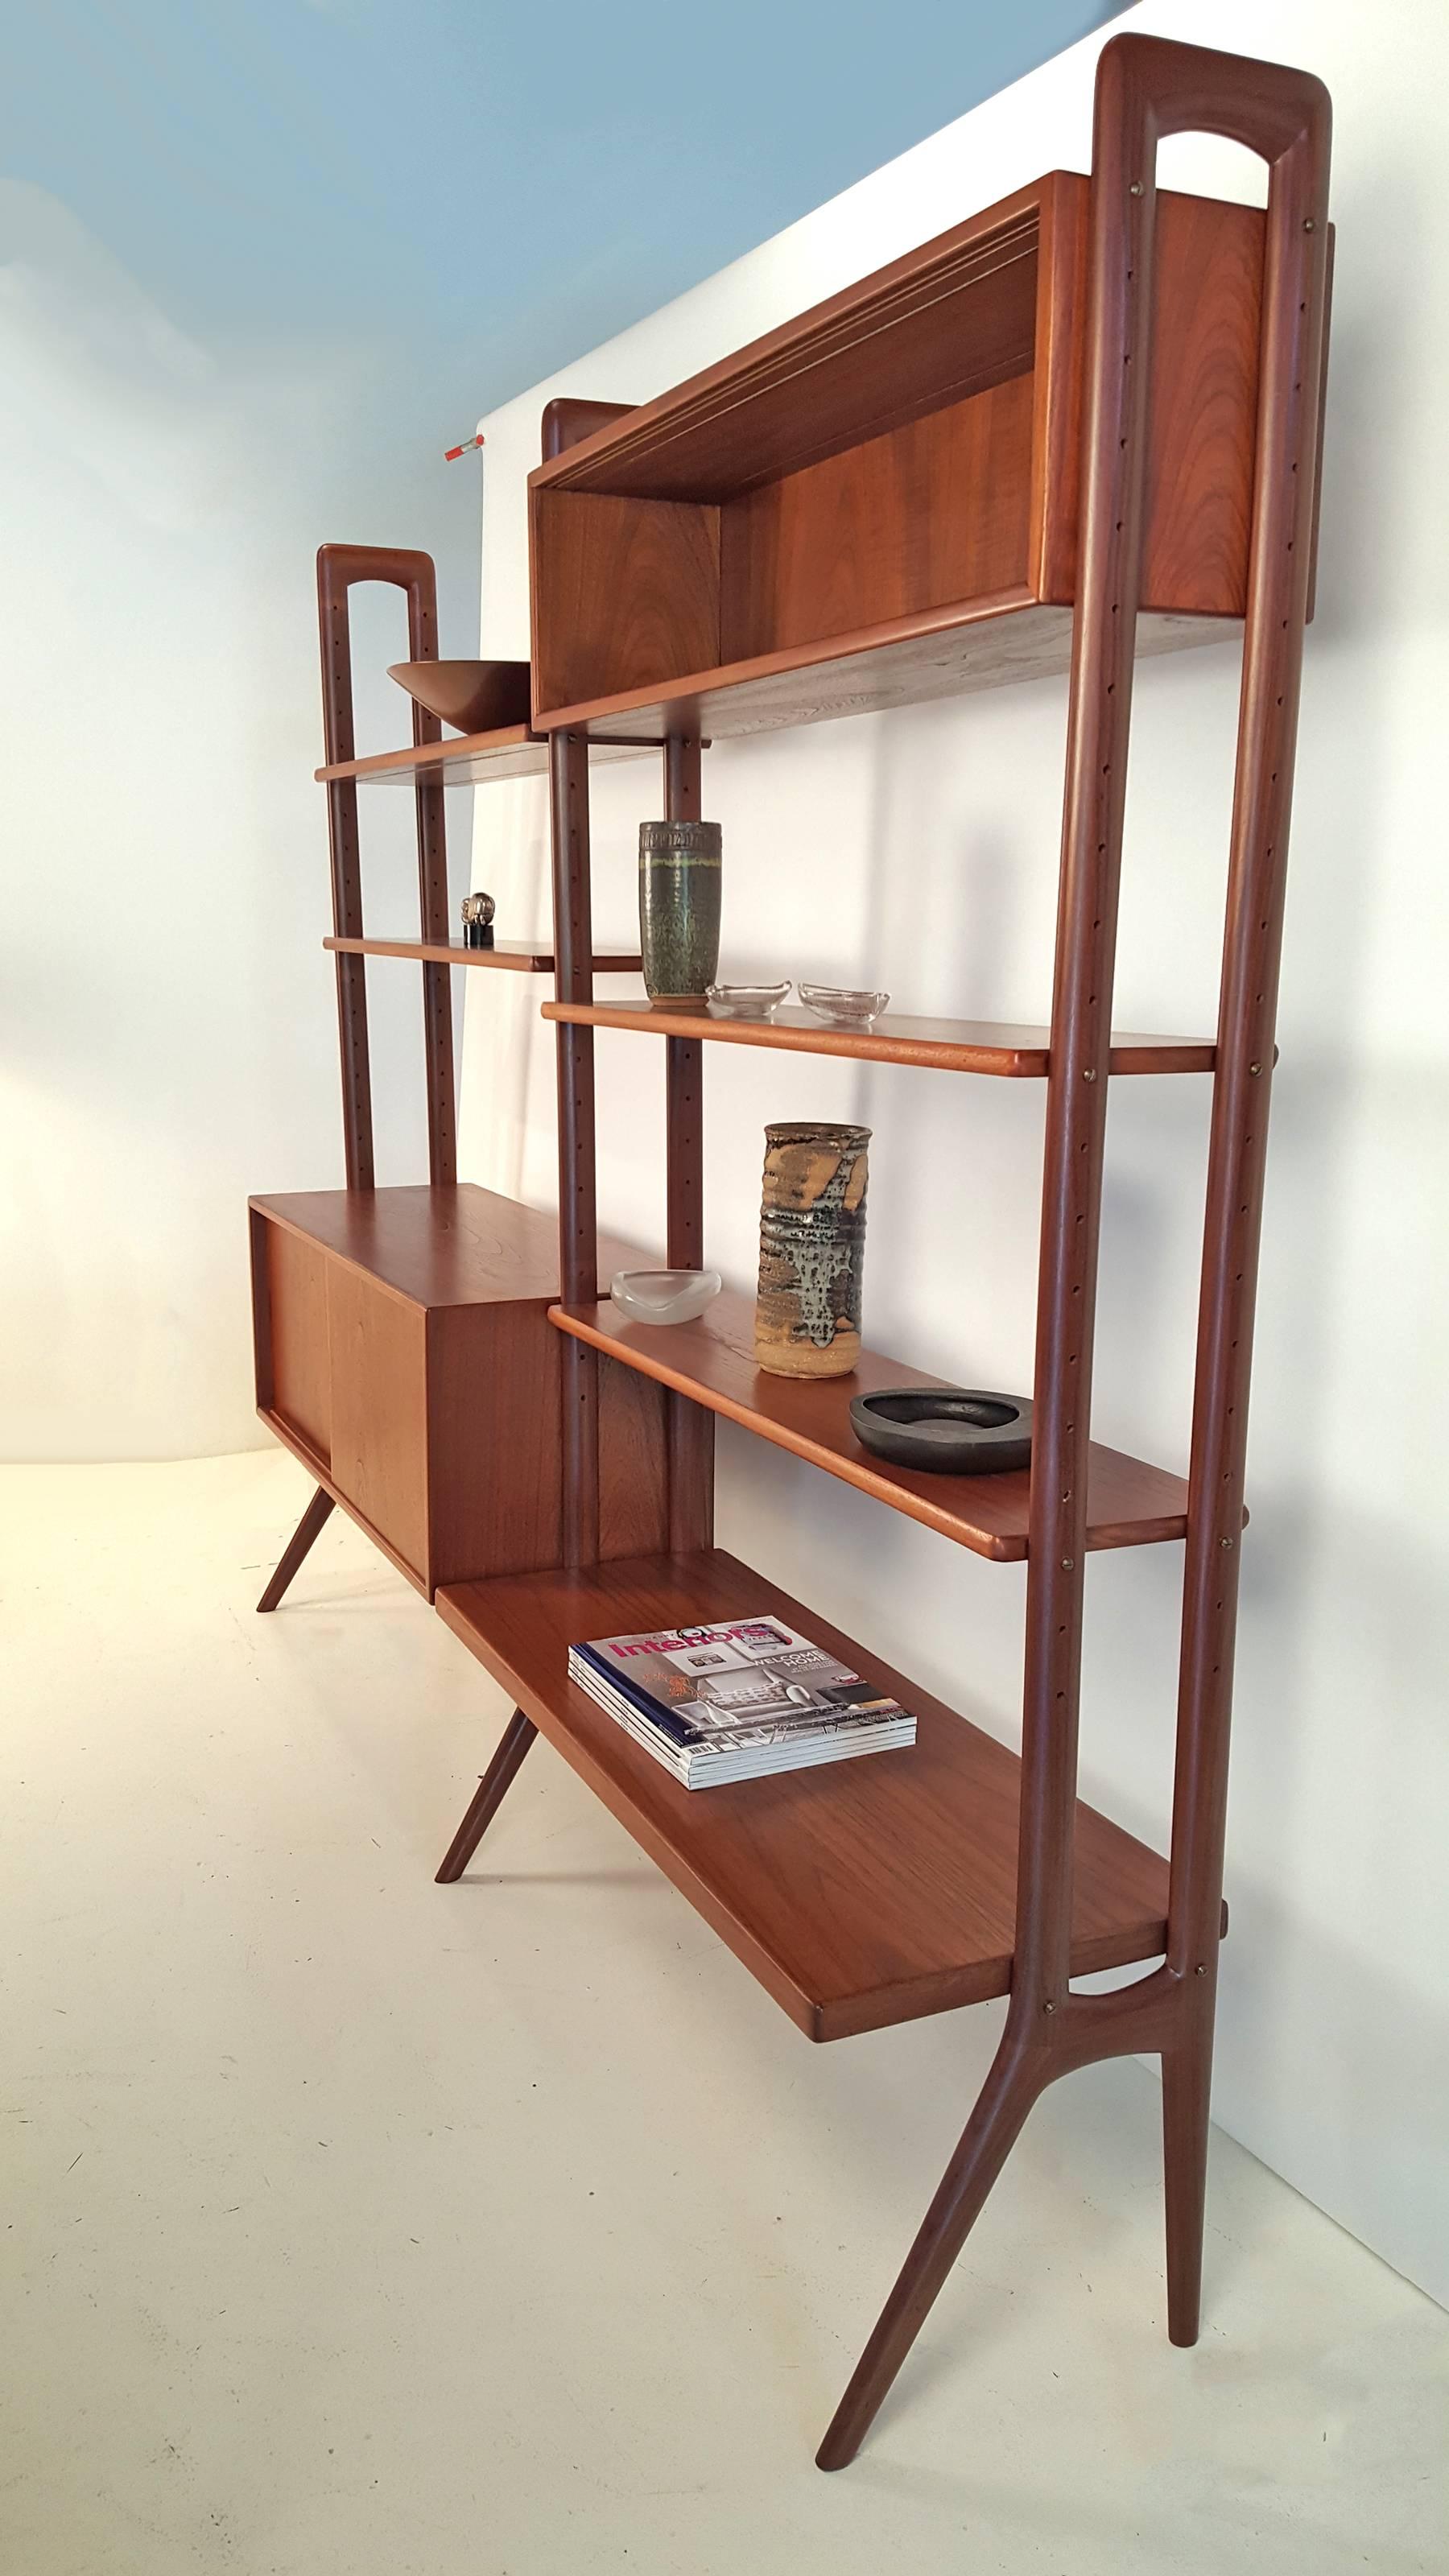 Kurt Ostervig designed freestanding Danish Modern wall unit in teak wood. Manufactured in Scandinavia in the 1960s. This Minimalist wall unit has been completely refinished and is in excellent condition. The shelves and cases can be re-arranged to